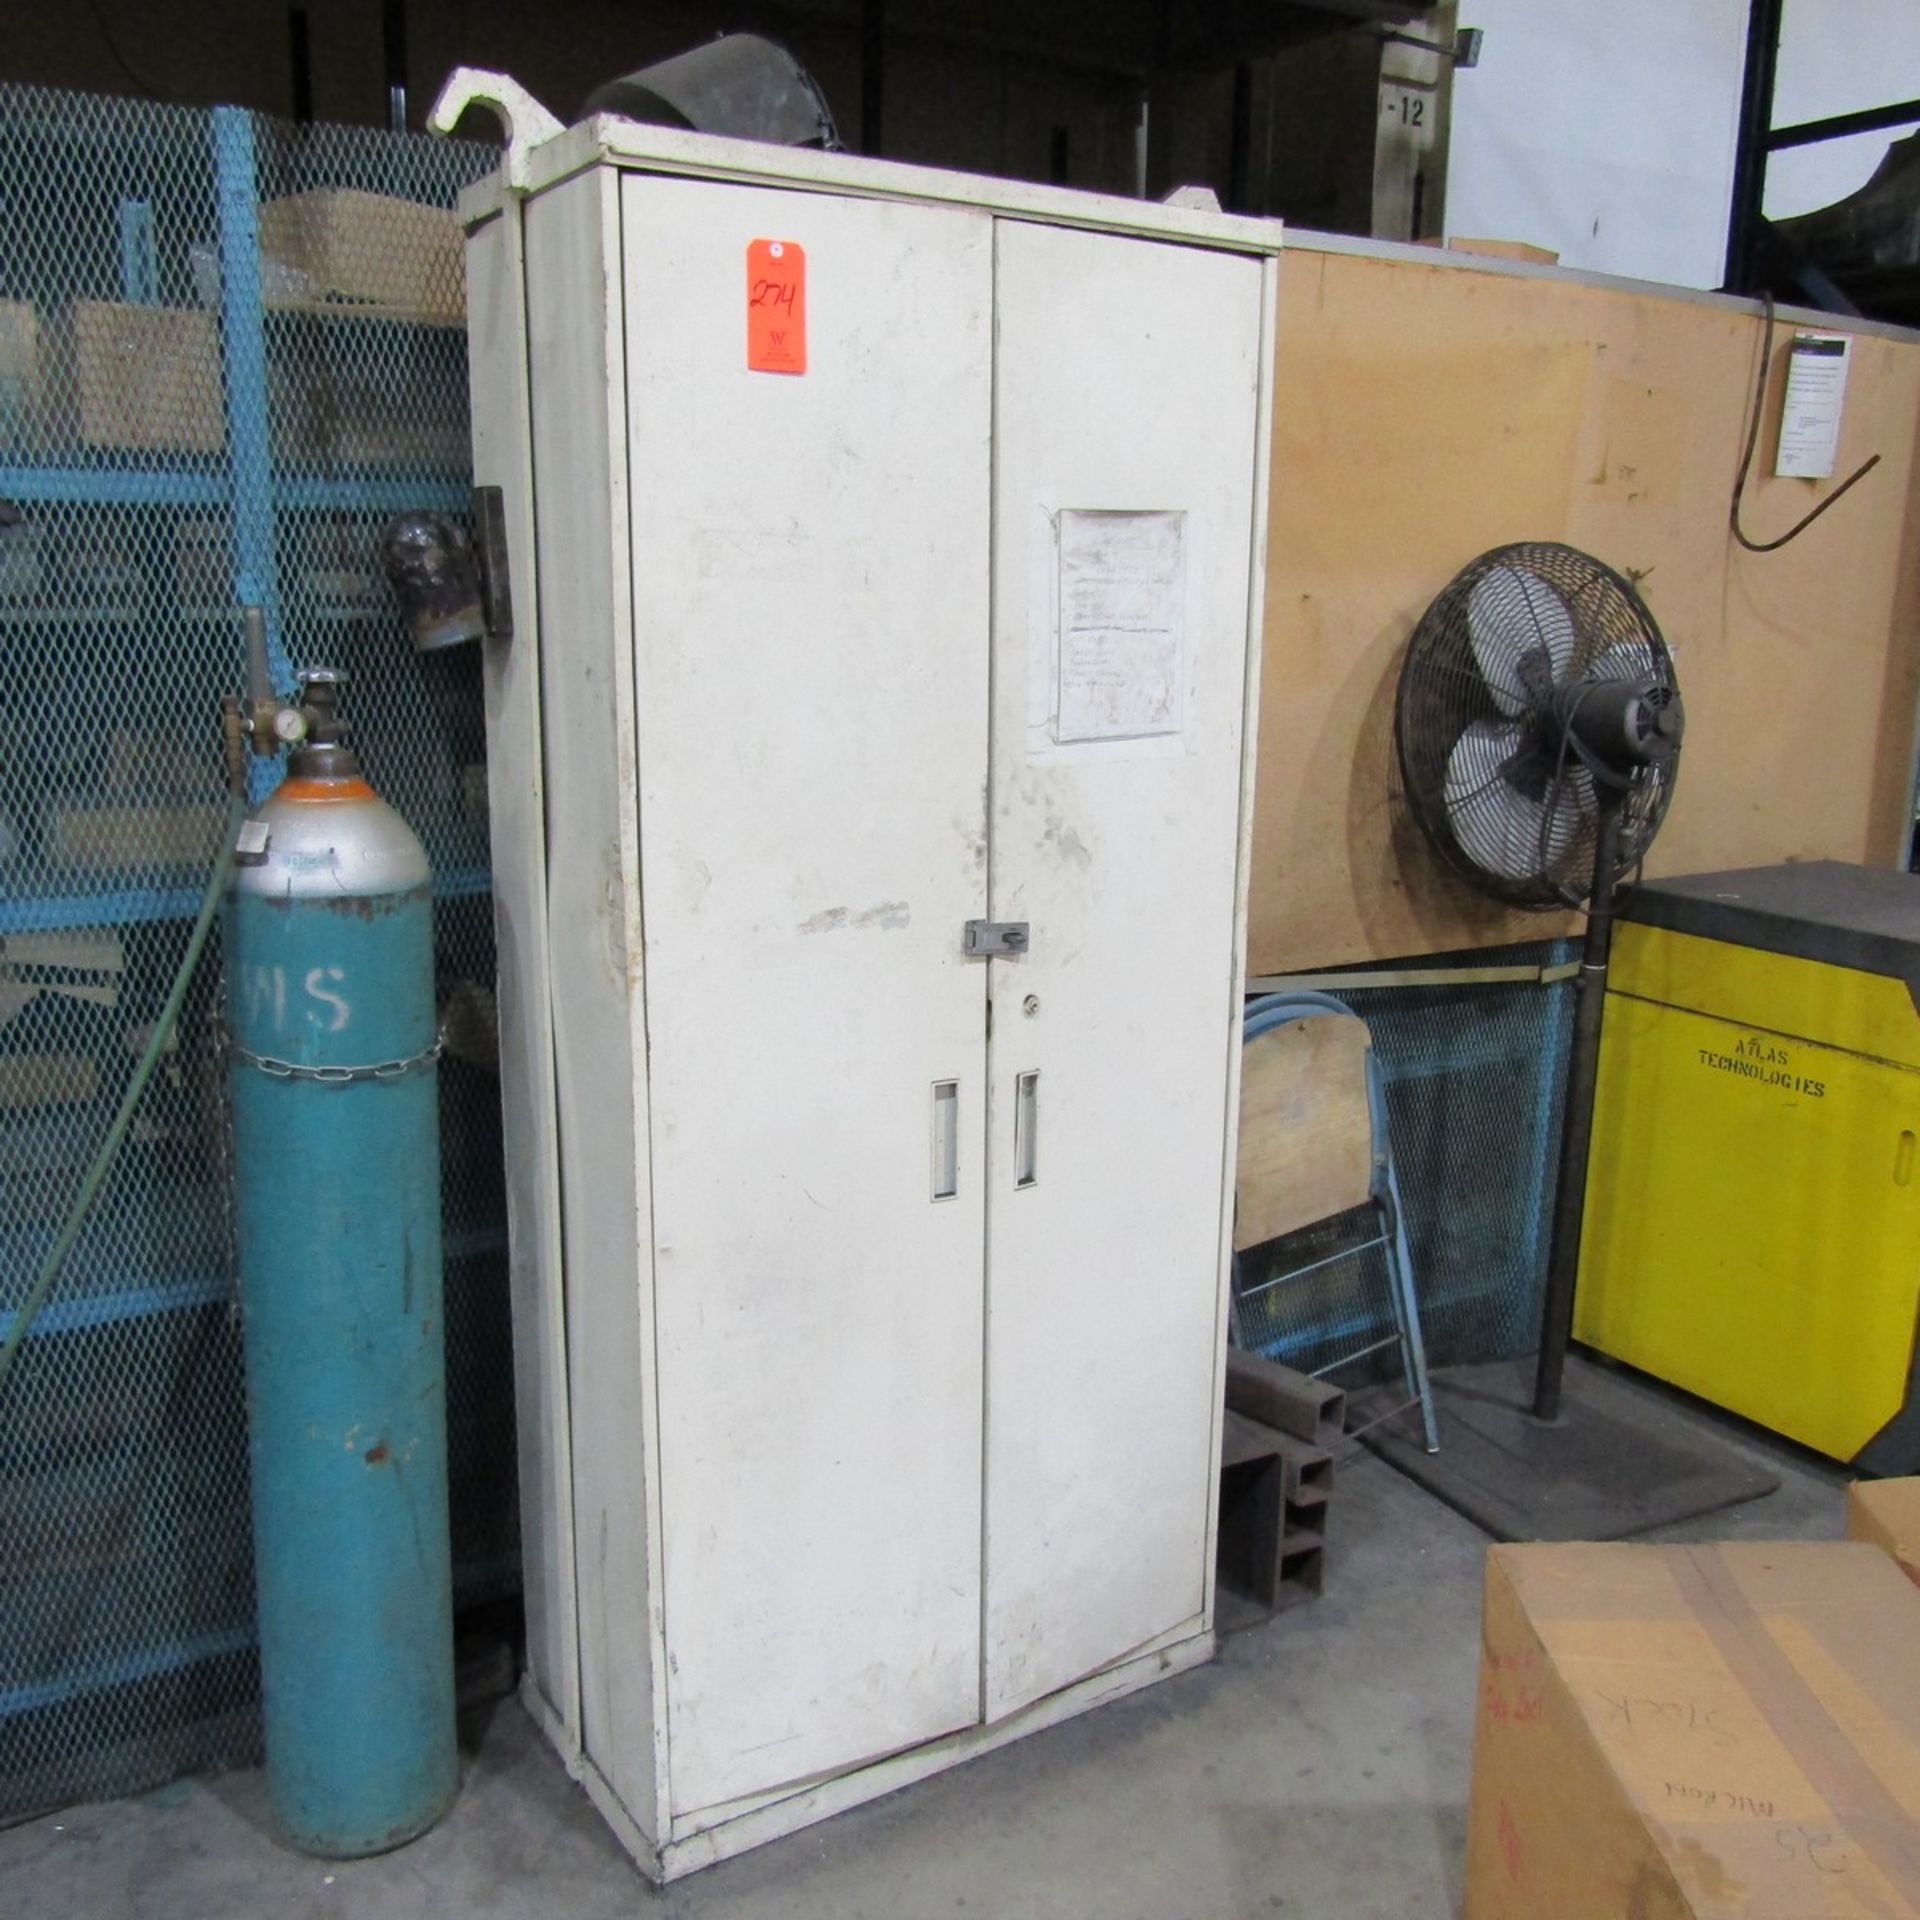 2-Door Cabinet with Contents, to Include: Sanding Discs, Face Masks, Grout Scrappers, Welding